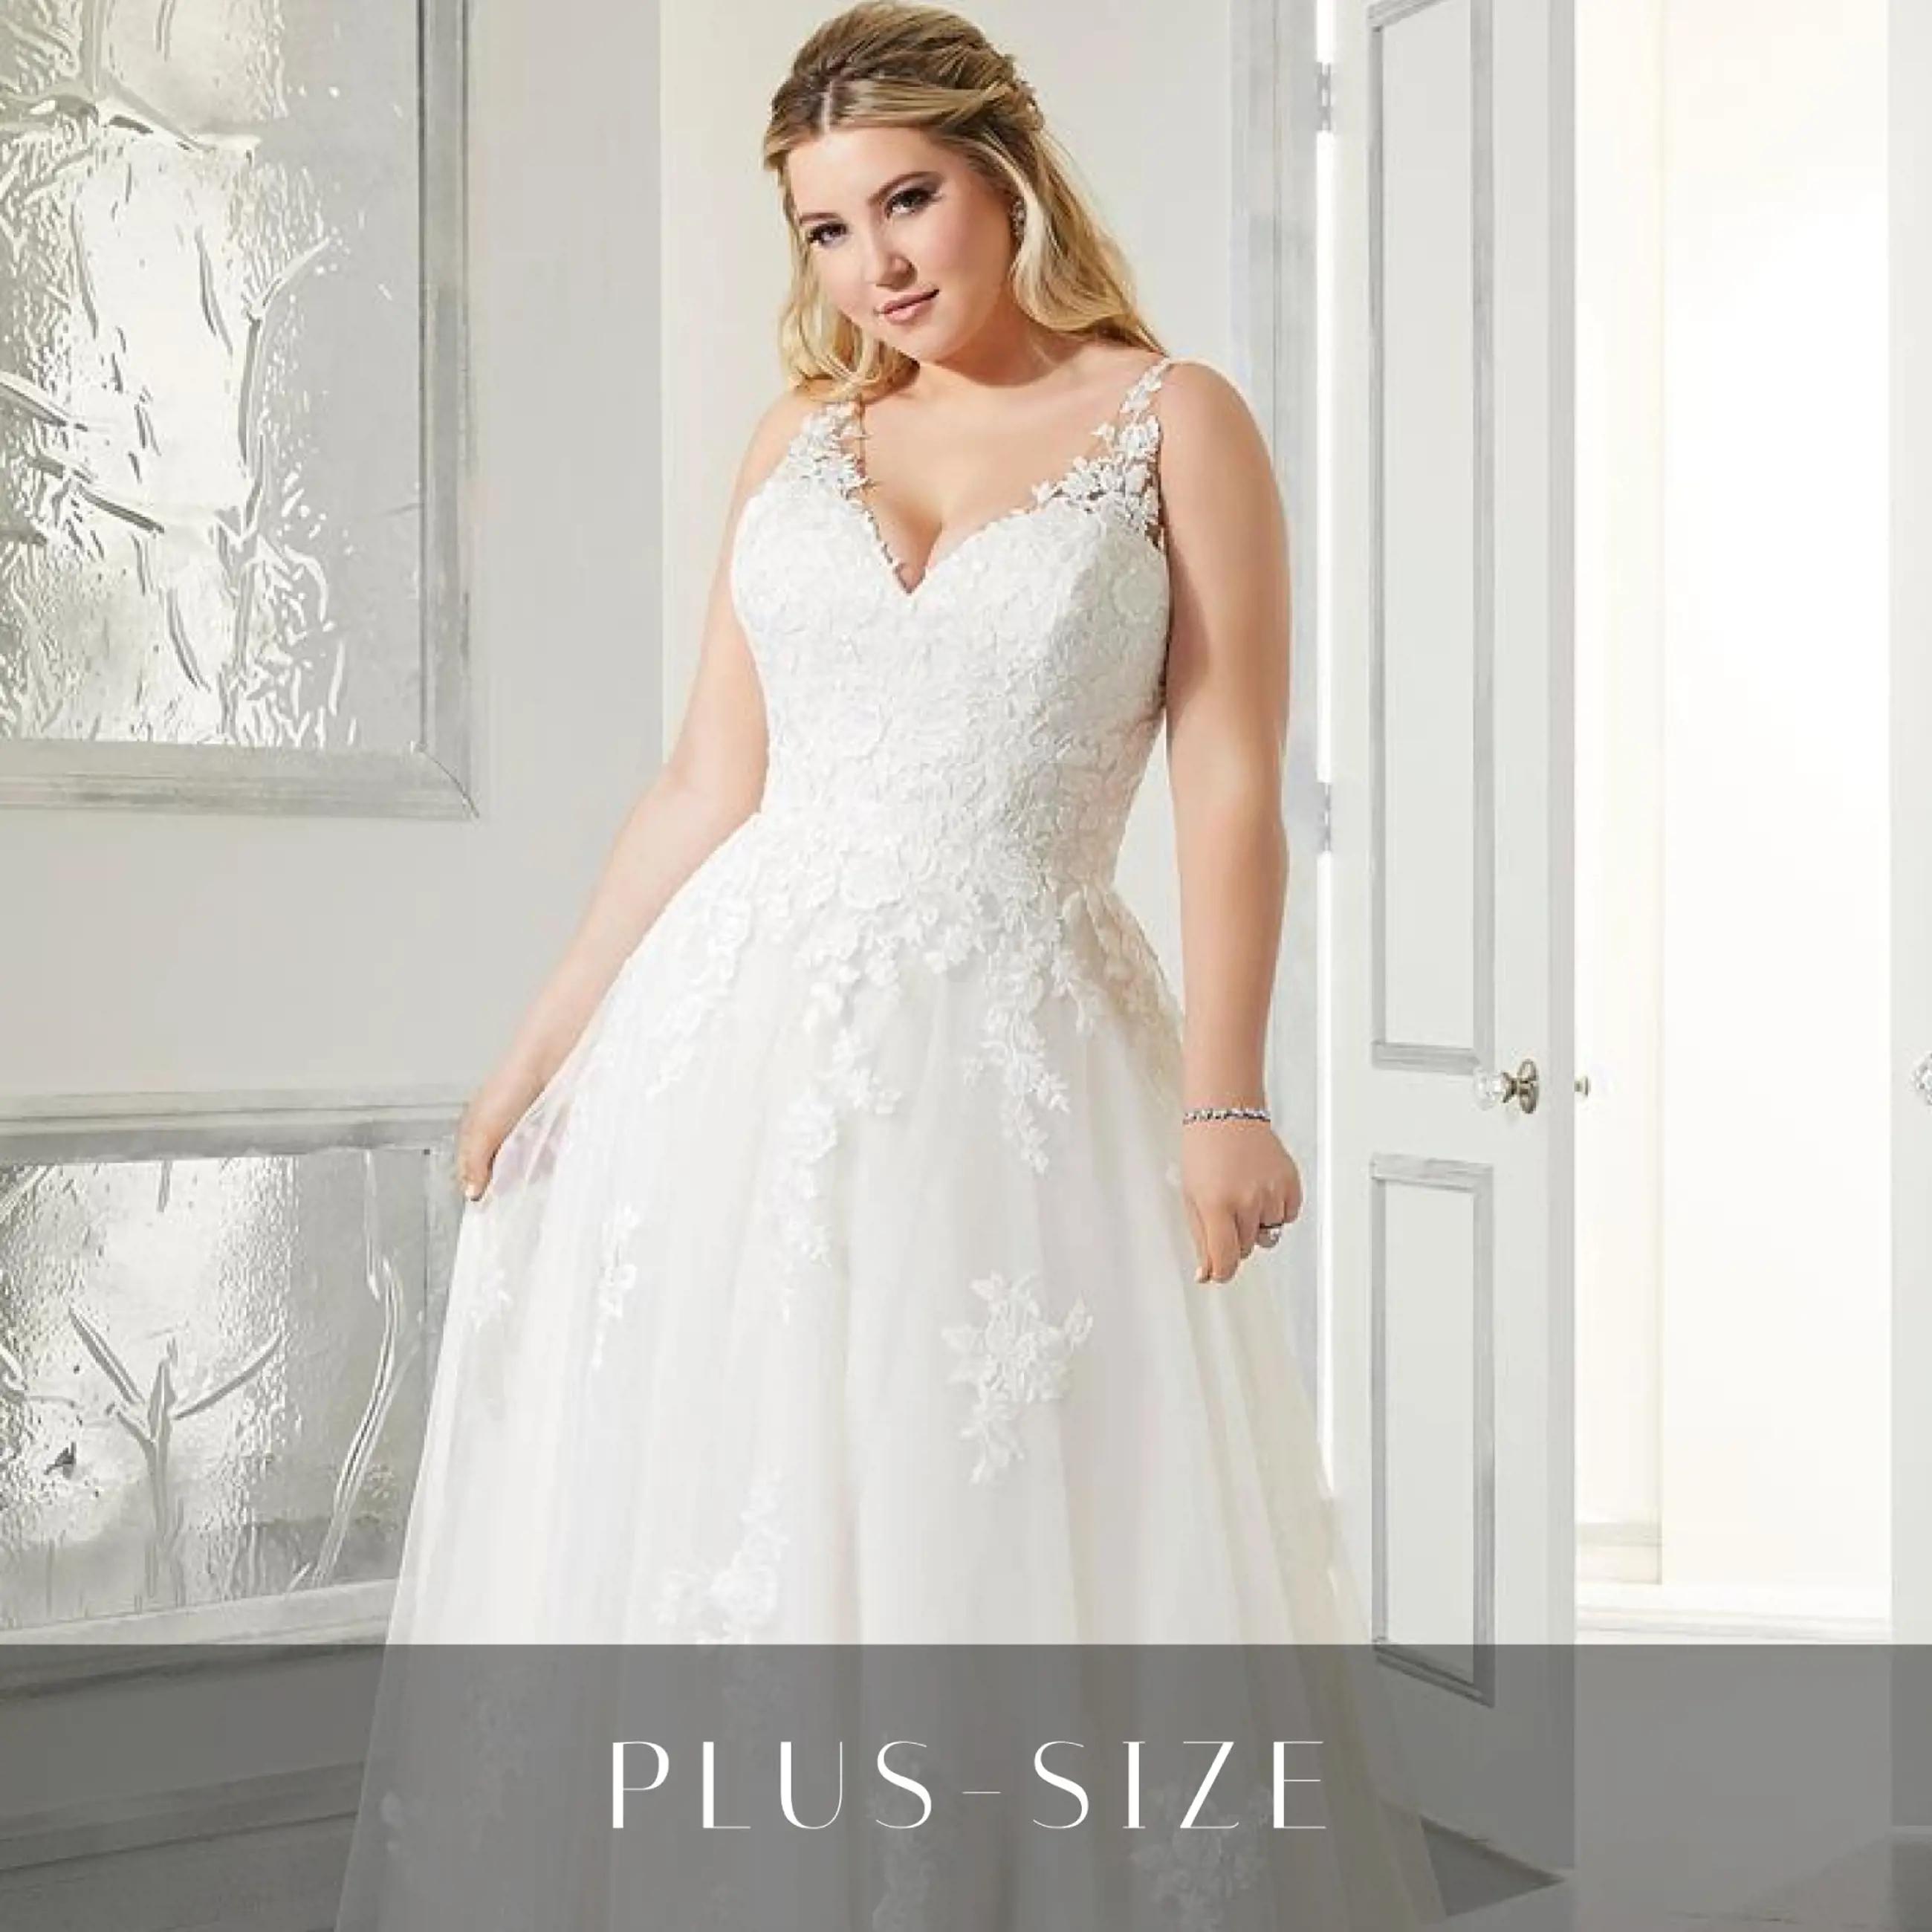 Model wearing a gown by Plus Size